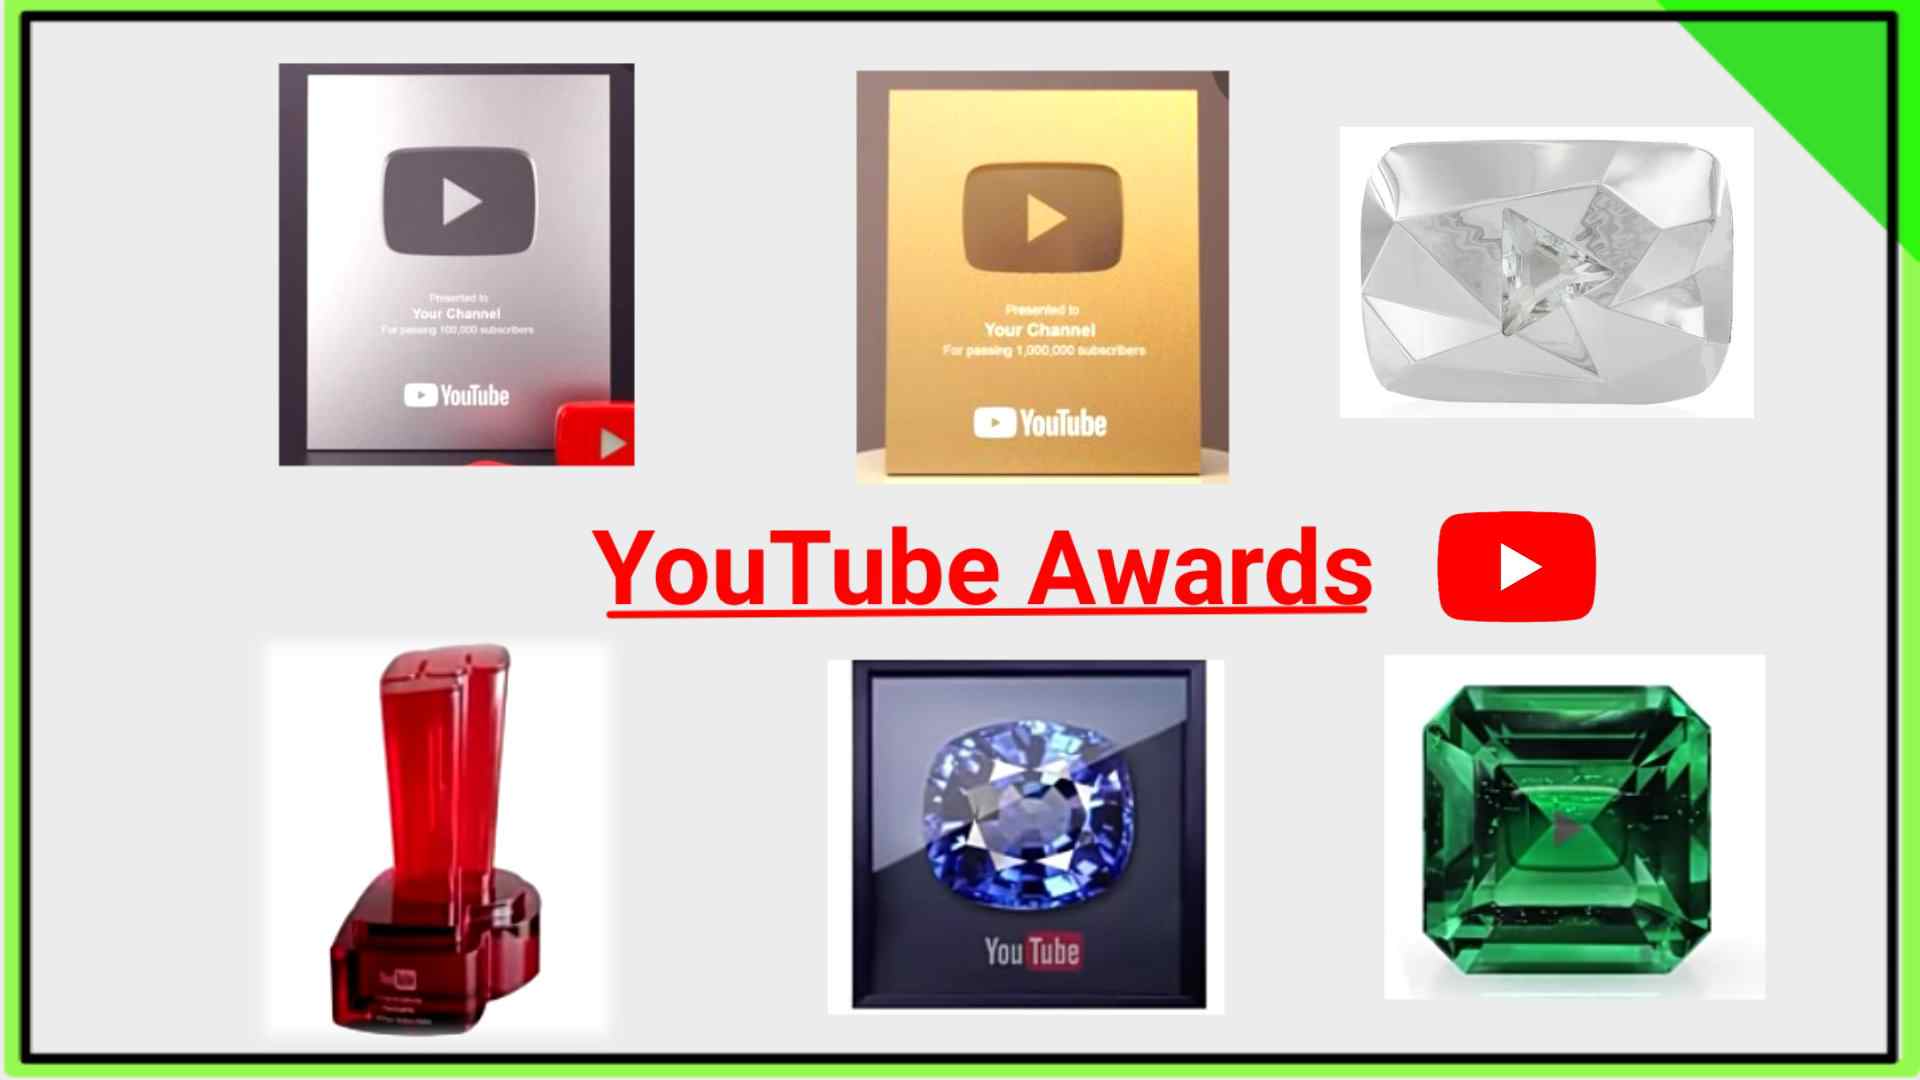 All Category of  Play Buttons